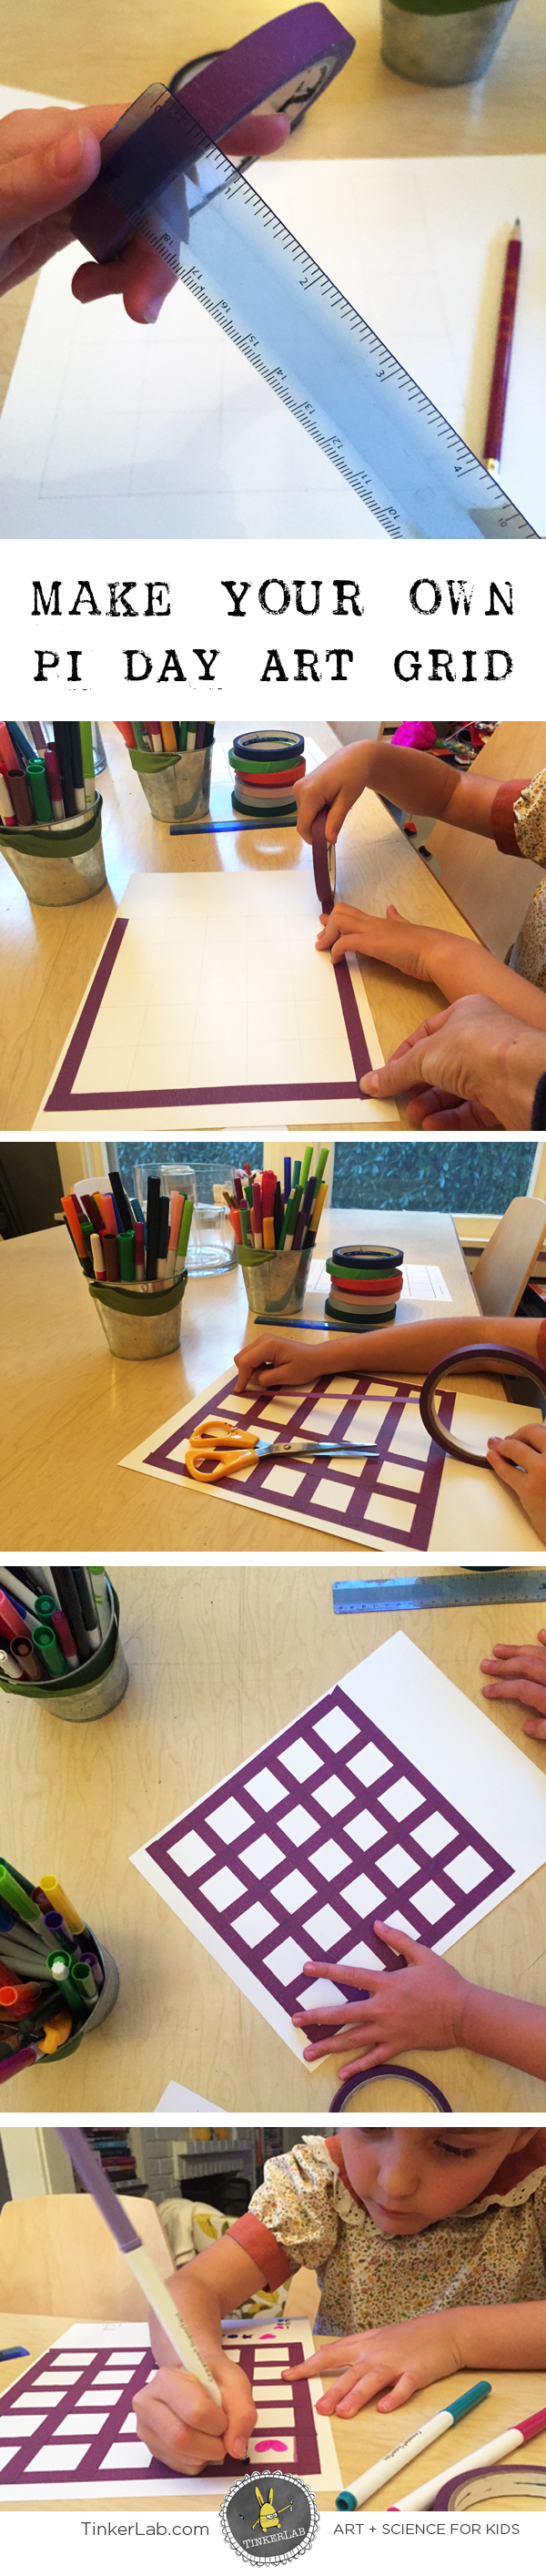 This fun and easy Pi Day Art Activity will get your creativity flowing, and it's a fun way to build enthusiasm around Pi Day | TinkerLab.com